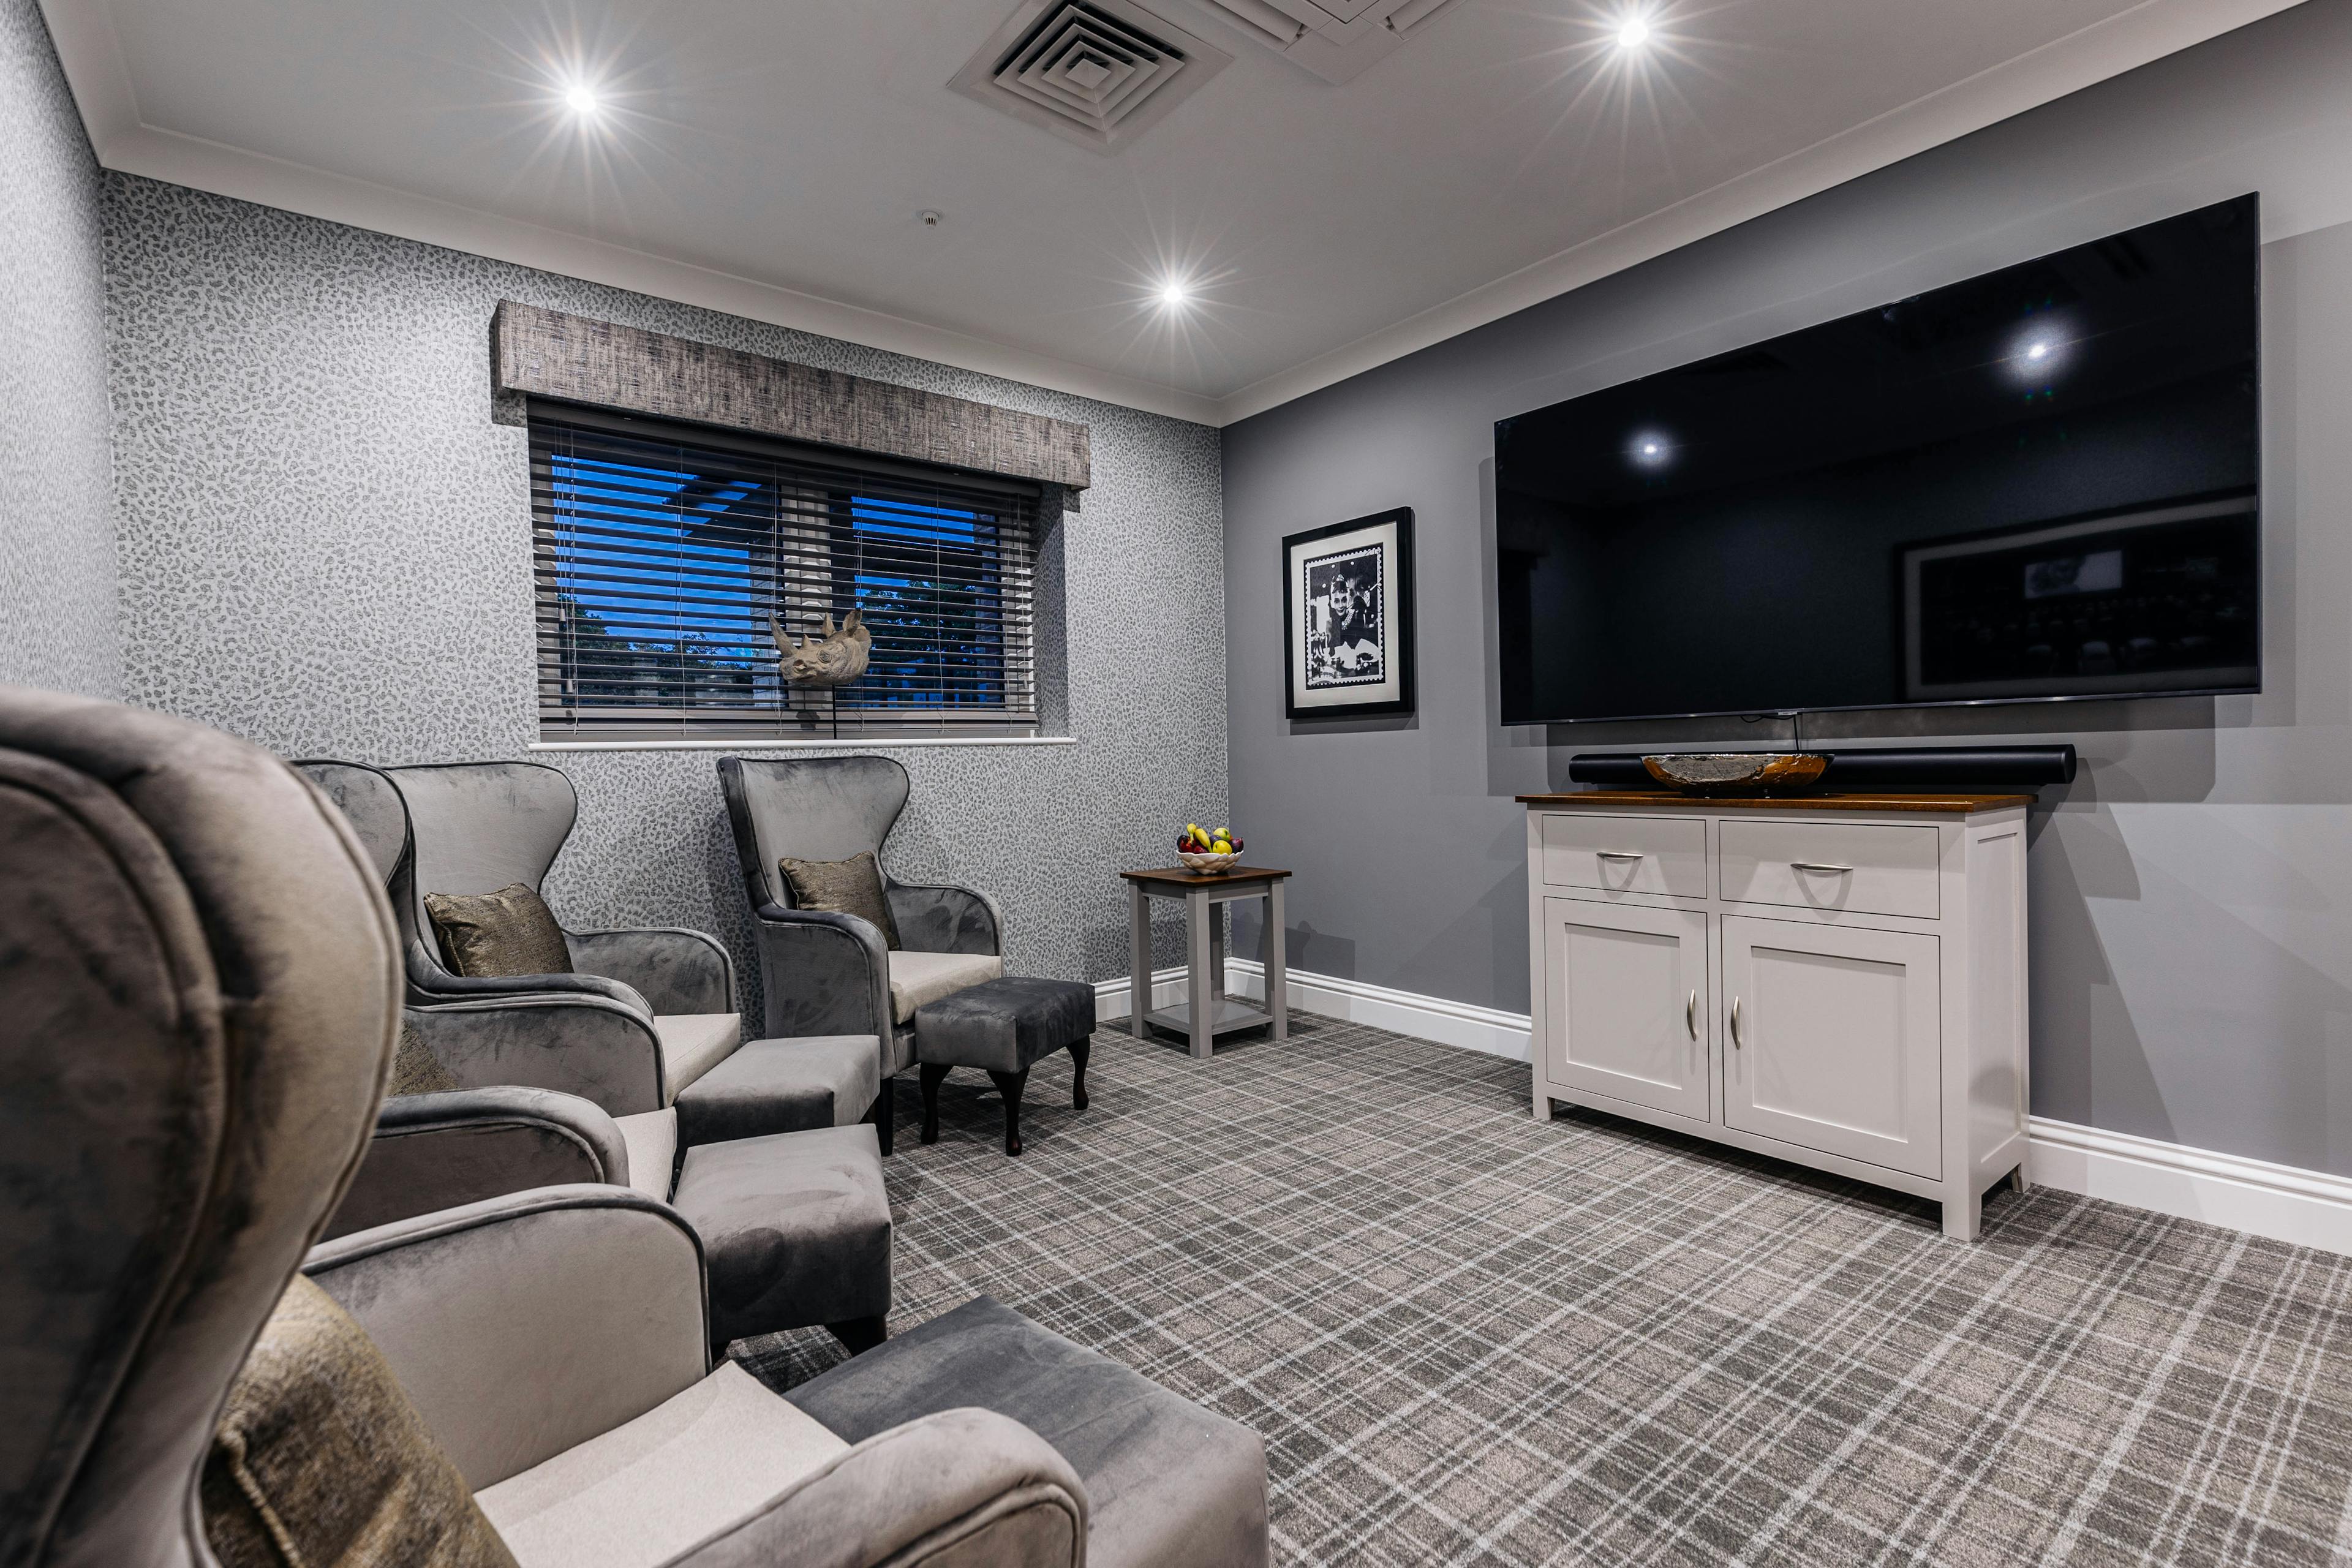 Cinema Room at Parley Place Care Home in Ferndown, Dorset